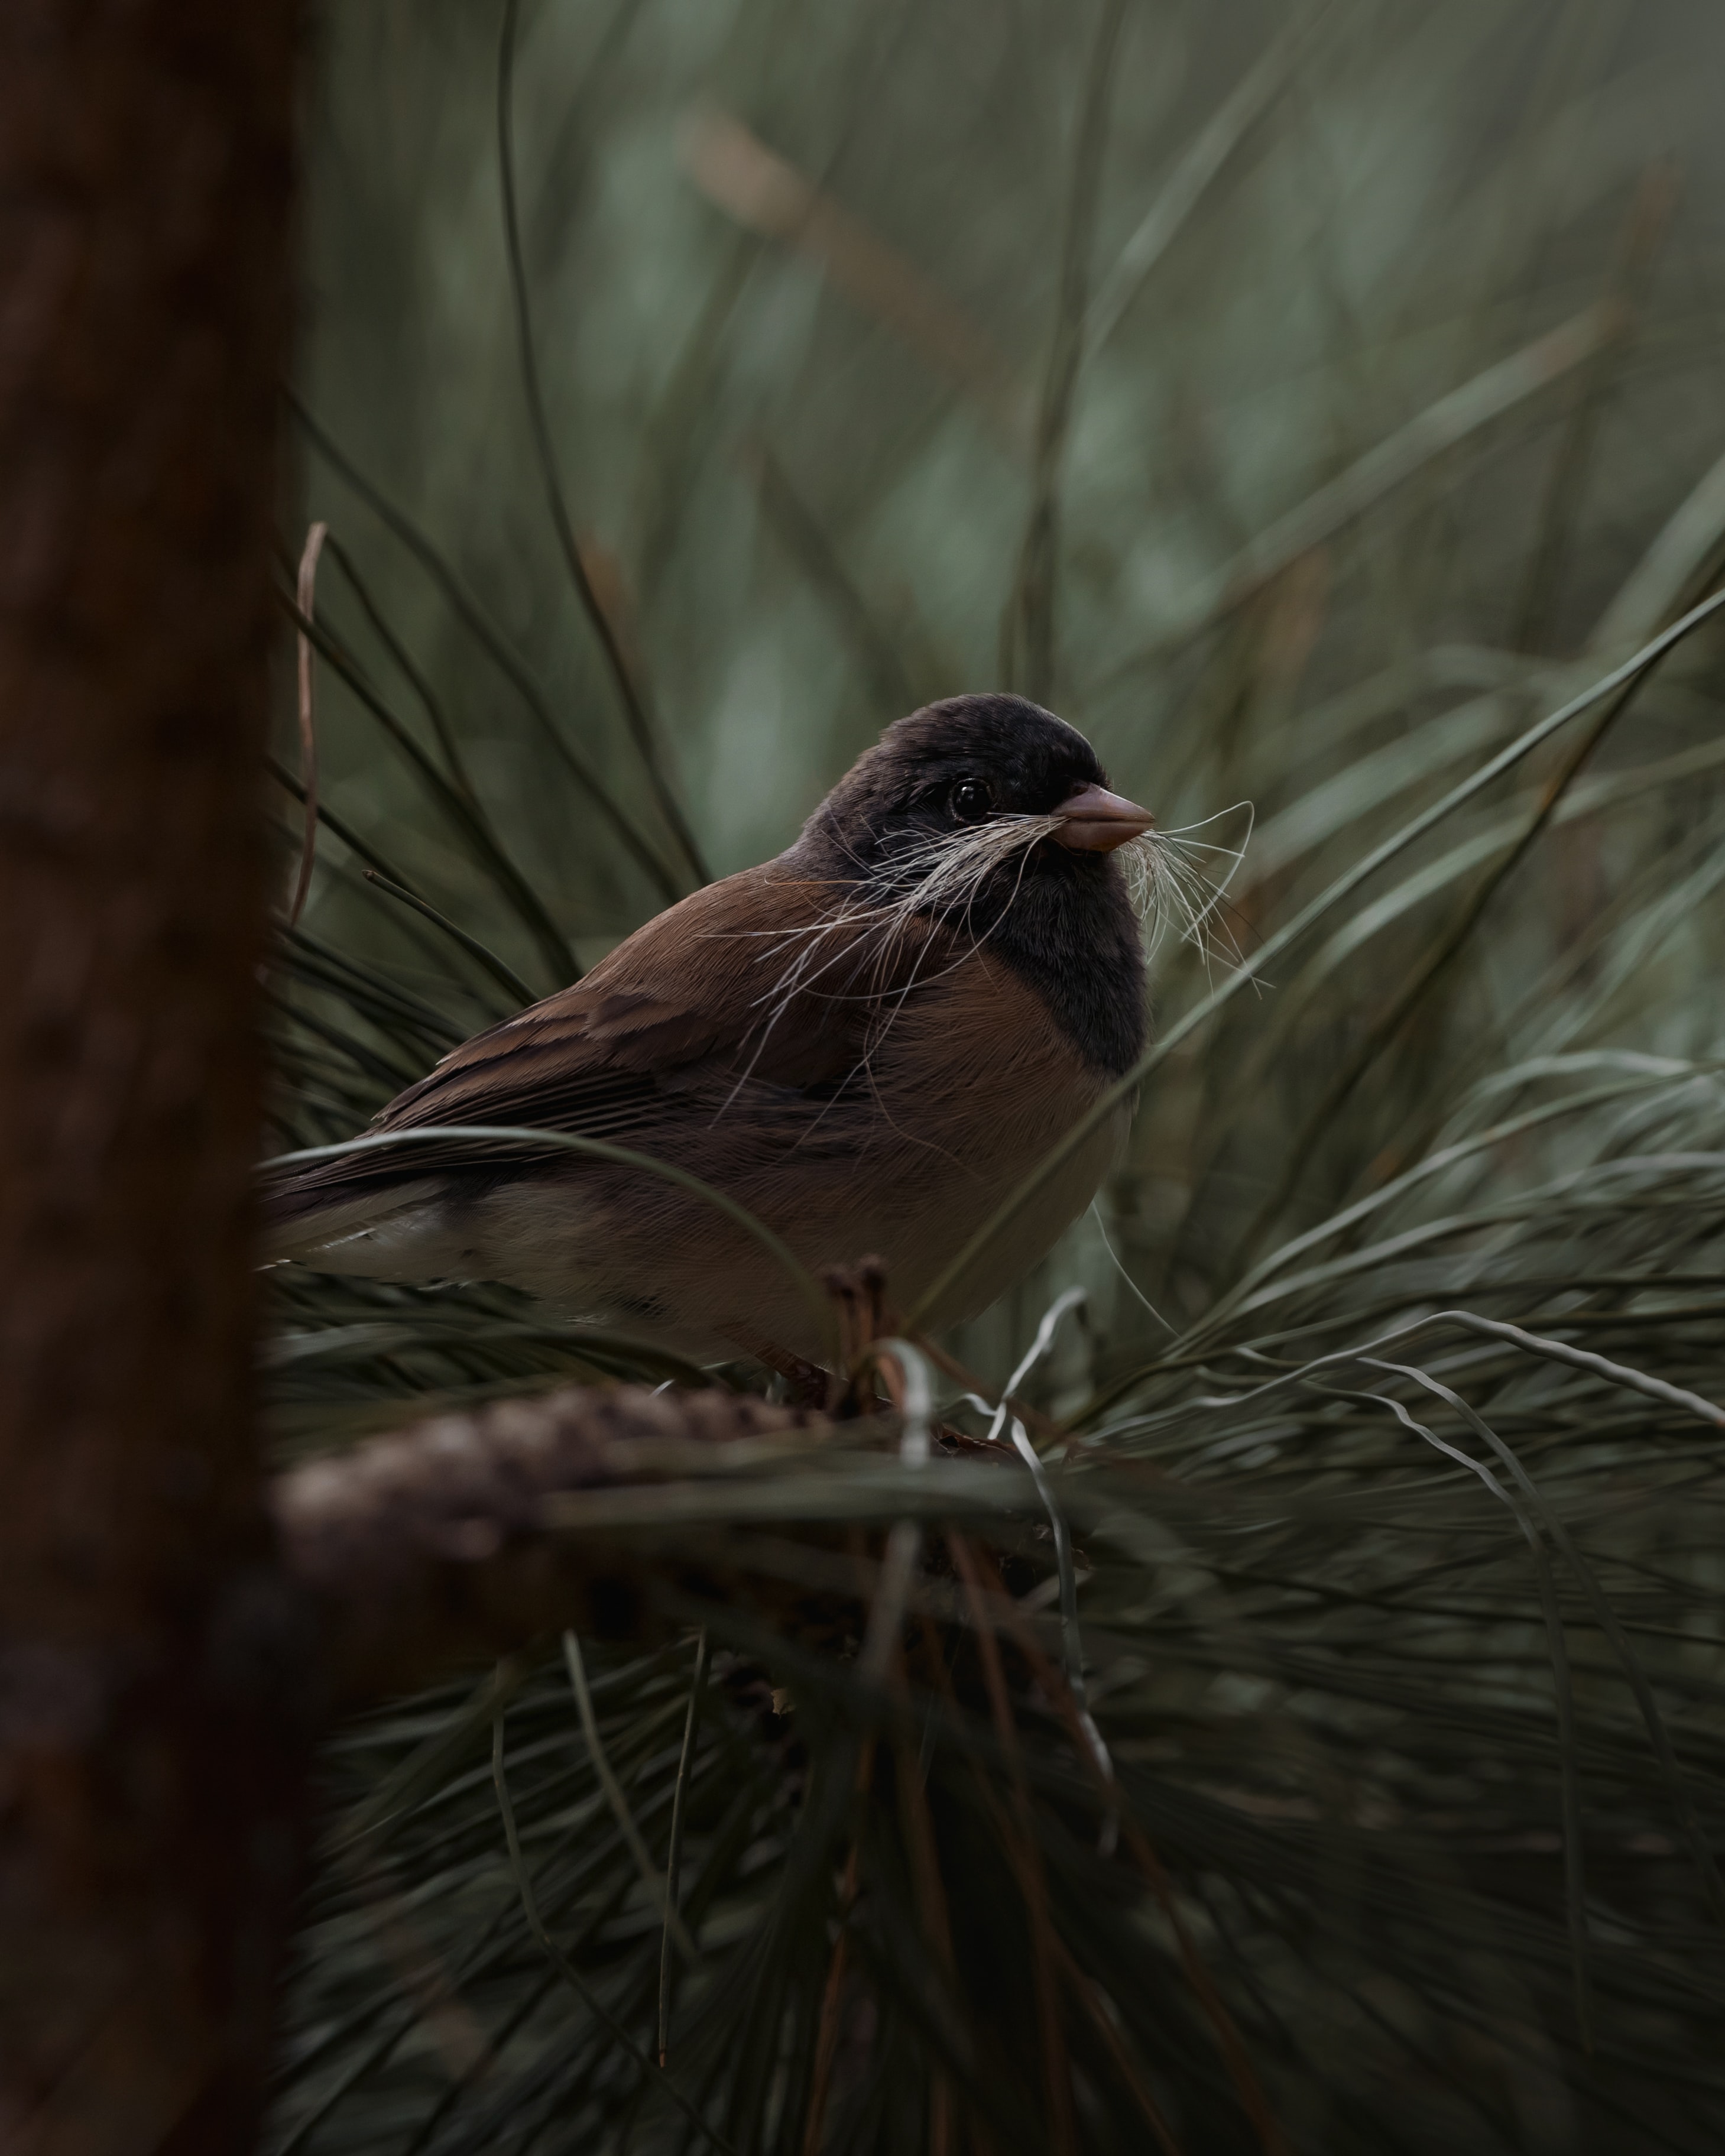 Brown and black sparrow sitting on a cedar tree branch. Credit: Lance Reis